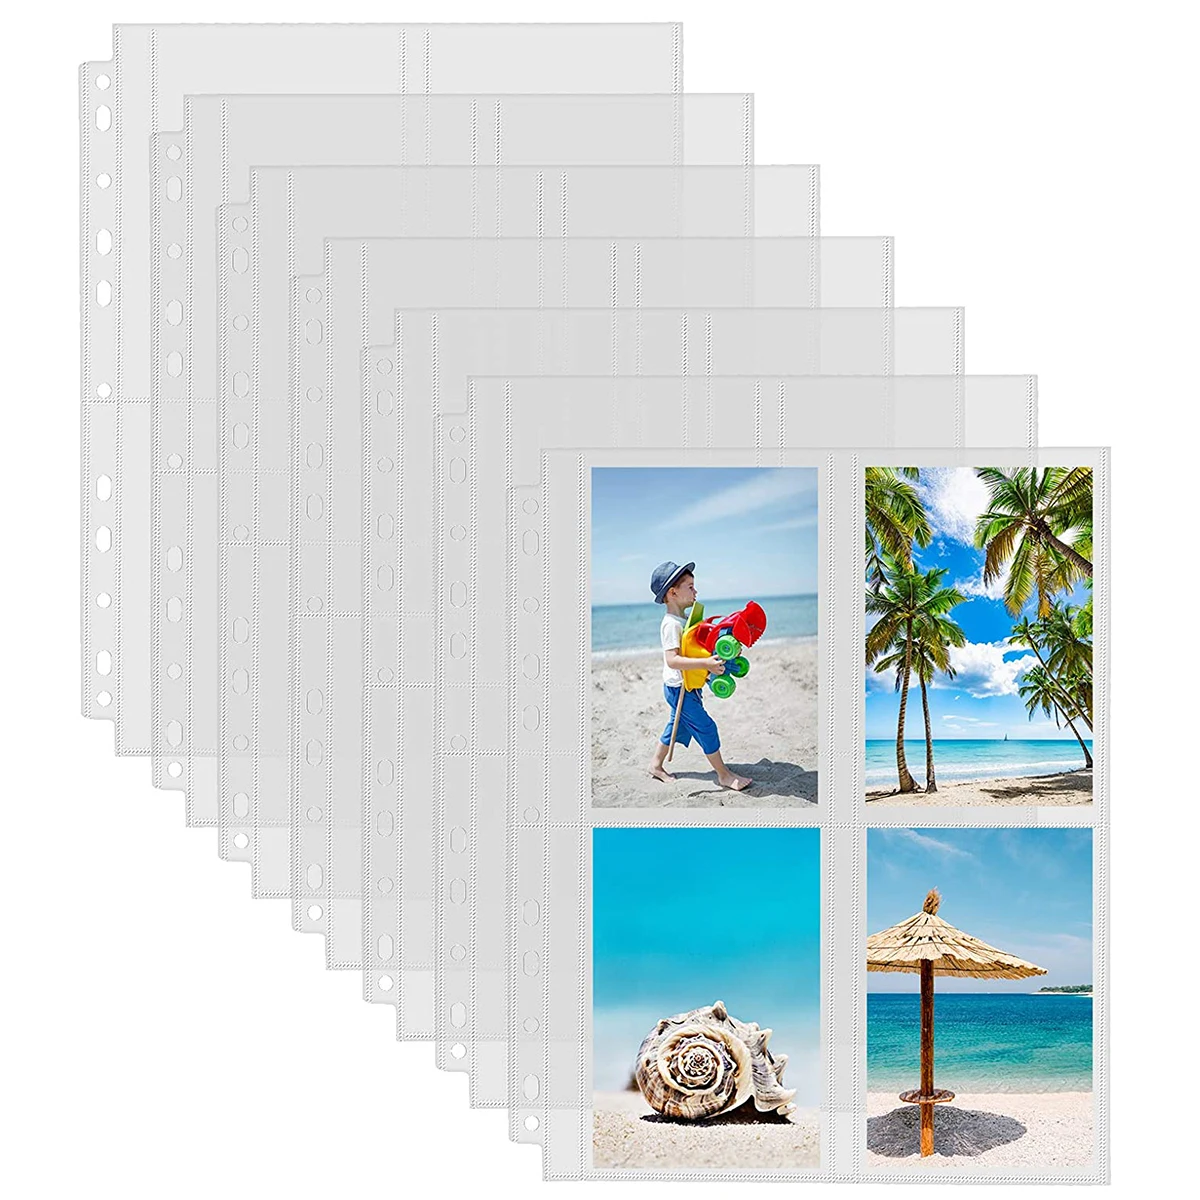 11 Hole Heavy Duty Photo Page Protector Plastic Clear Photo Album